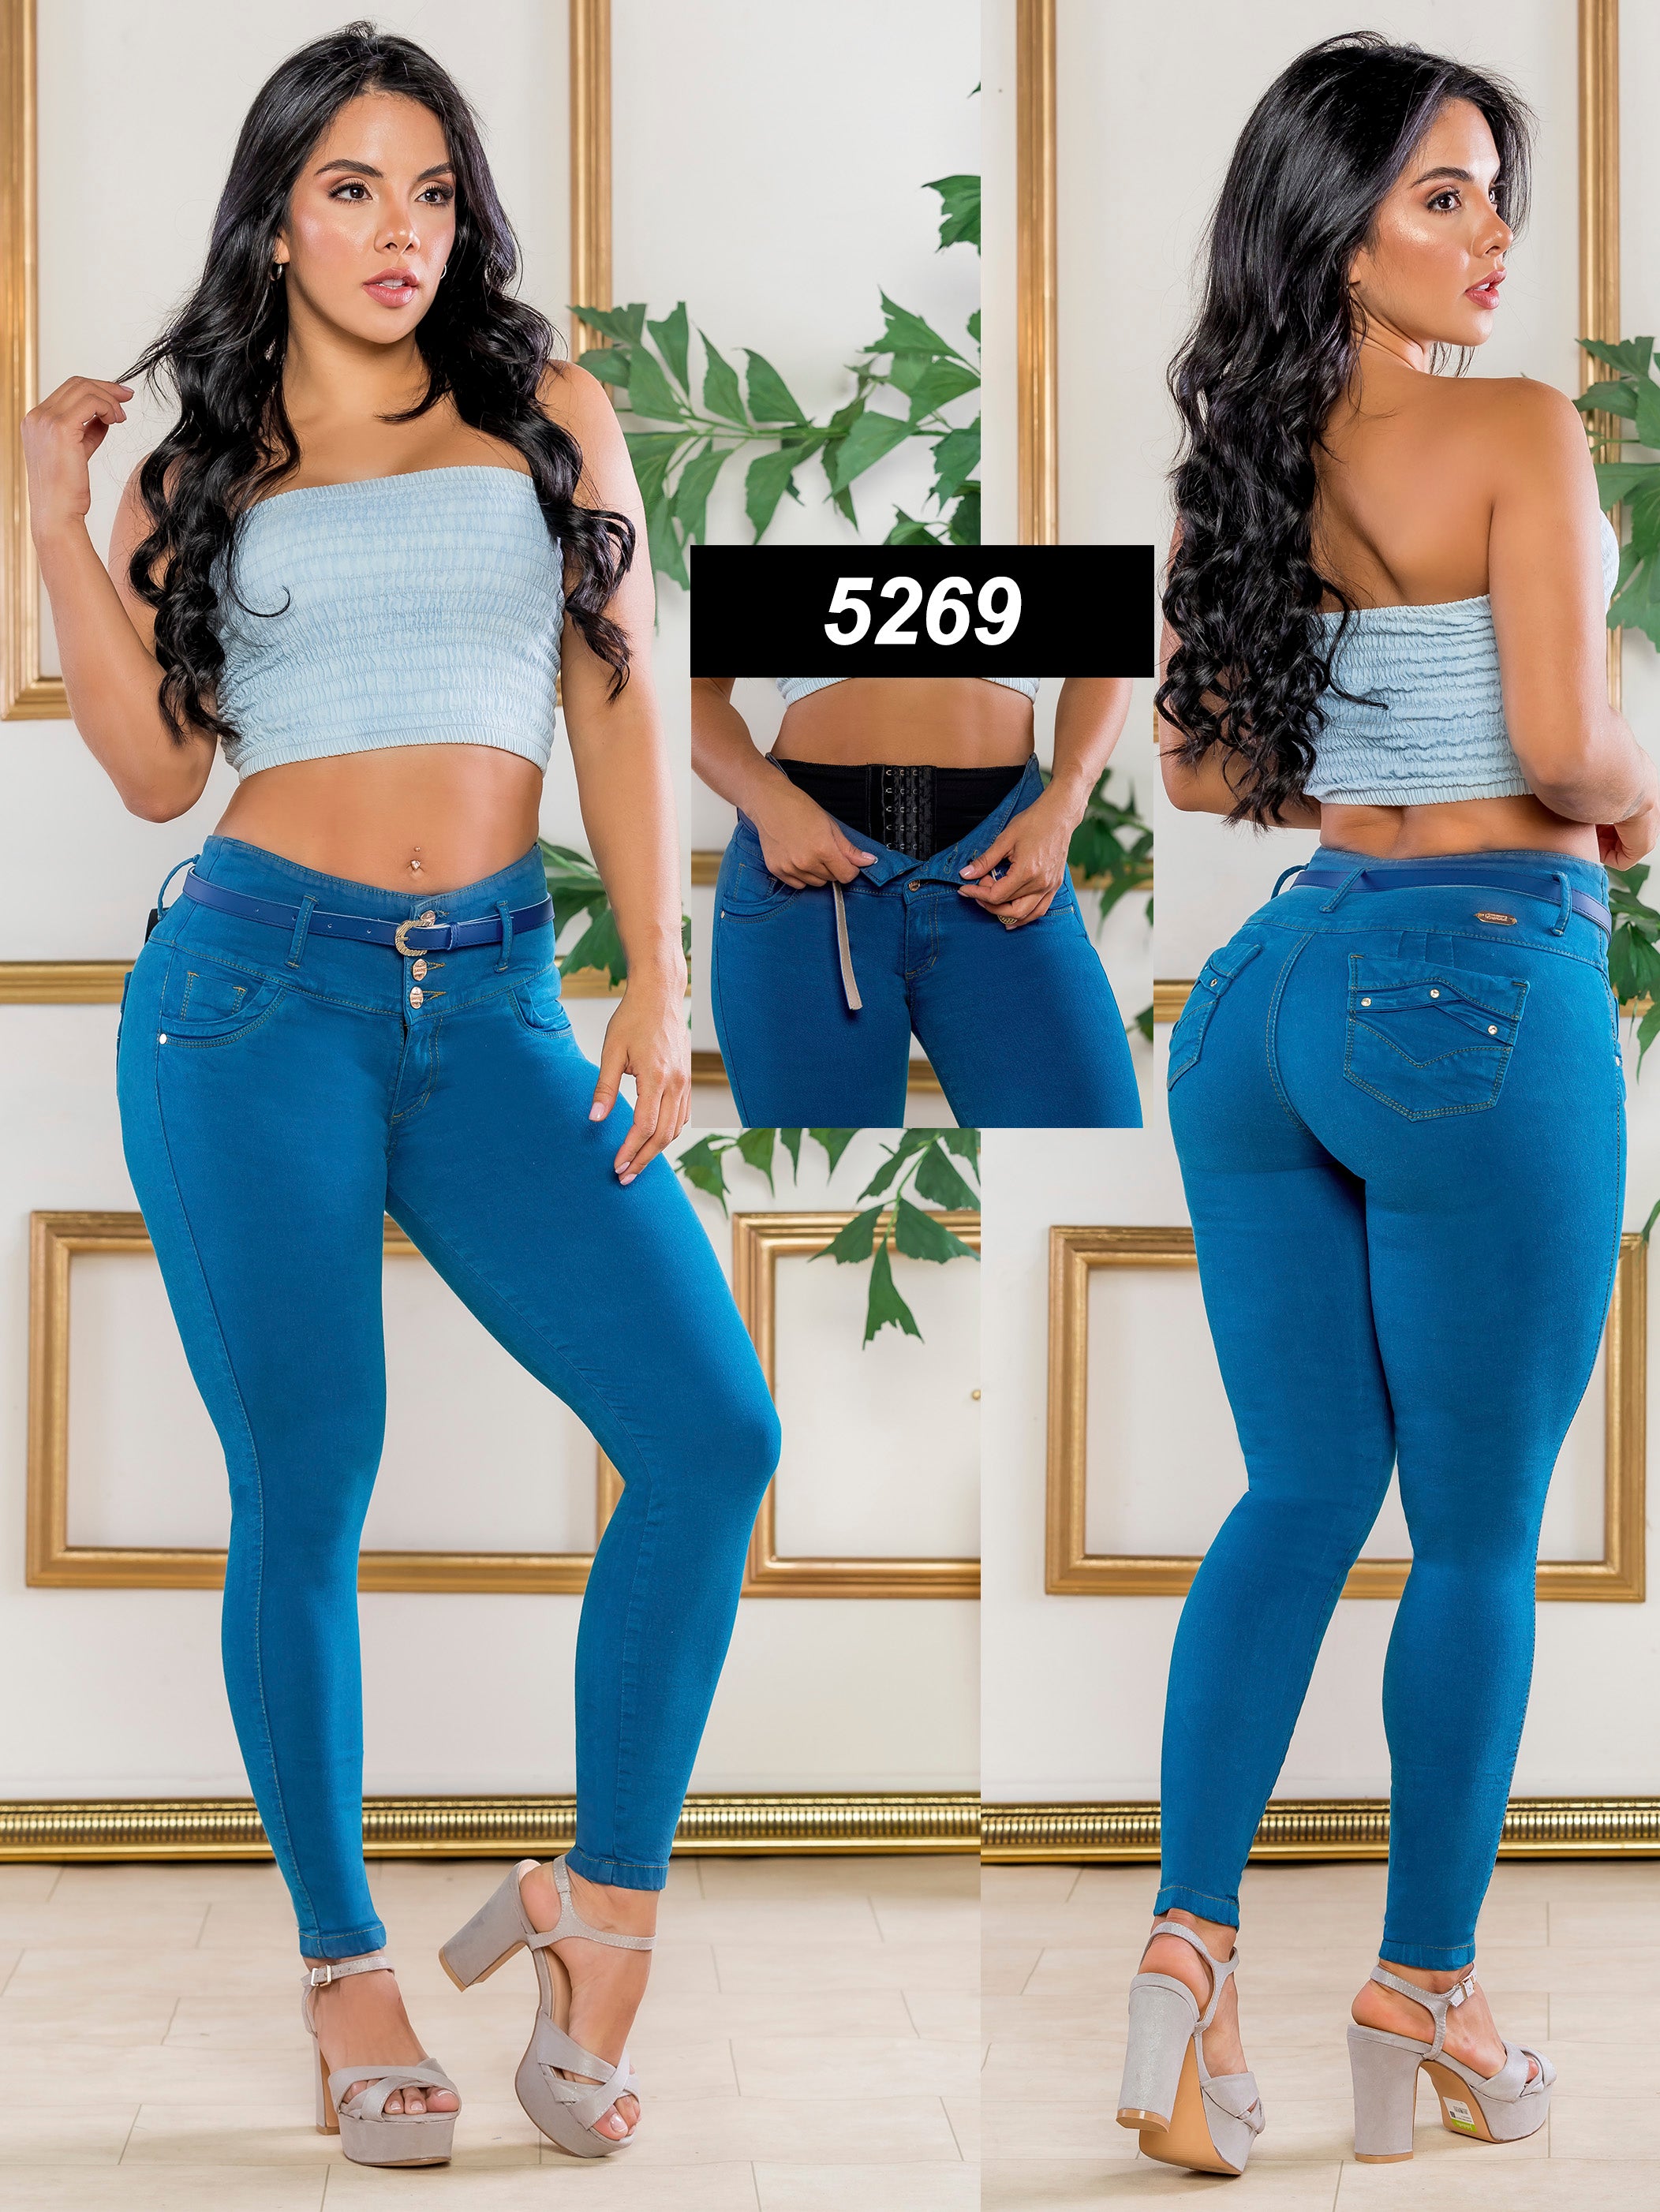 Colombian Butt lifting Jean – levantacolacolombianos